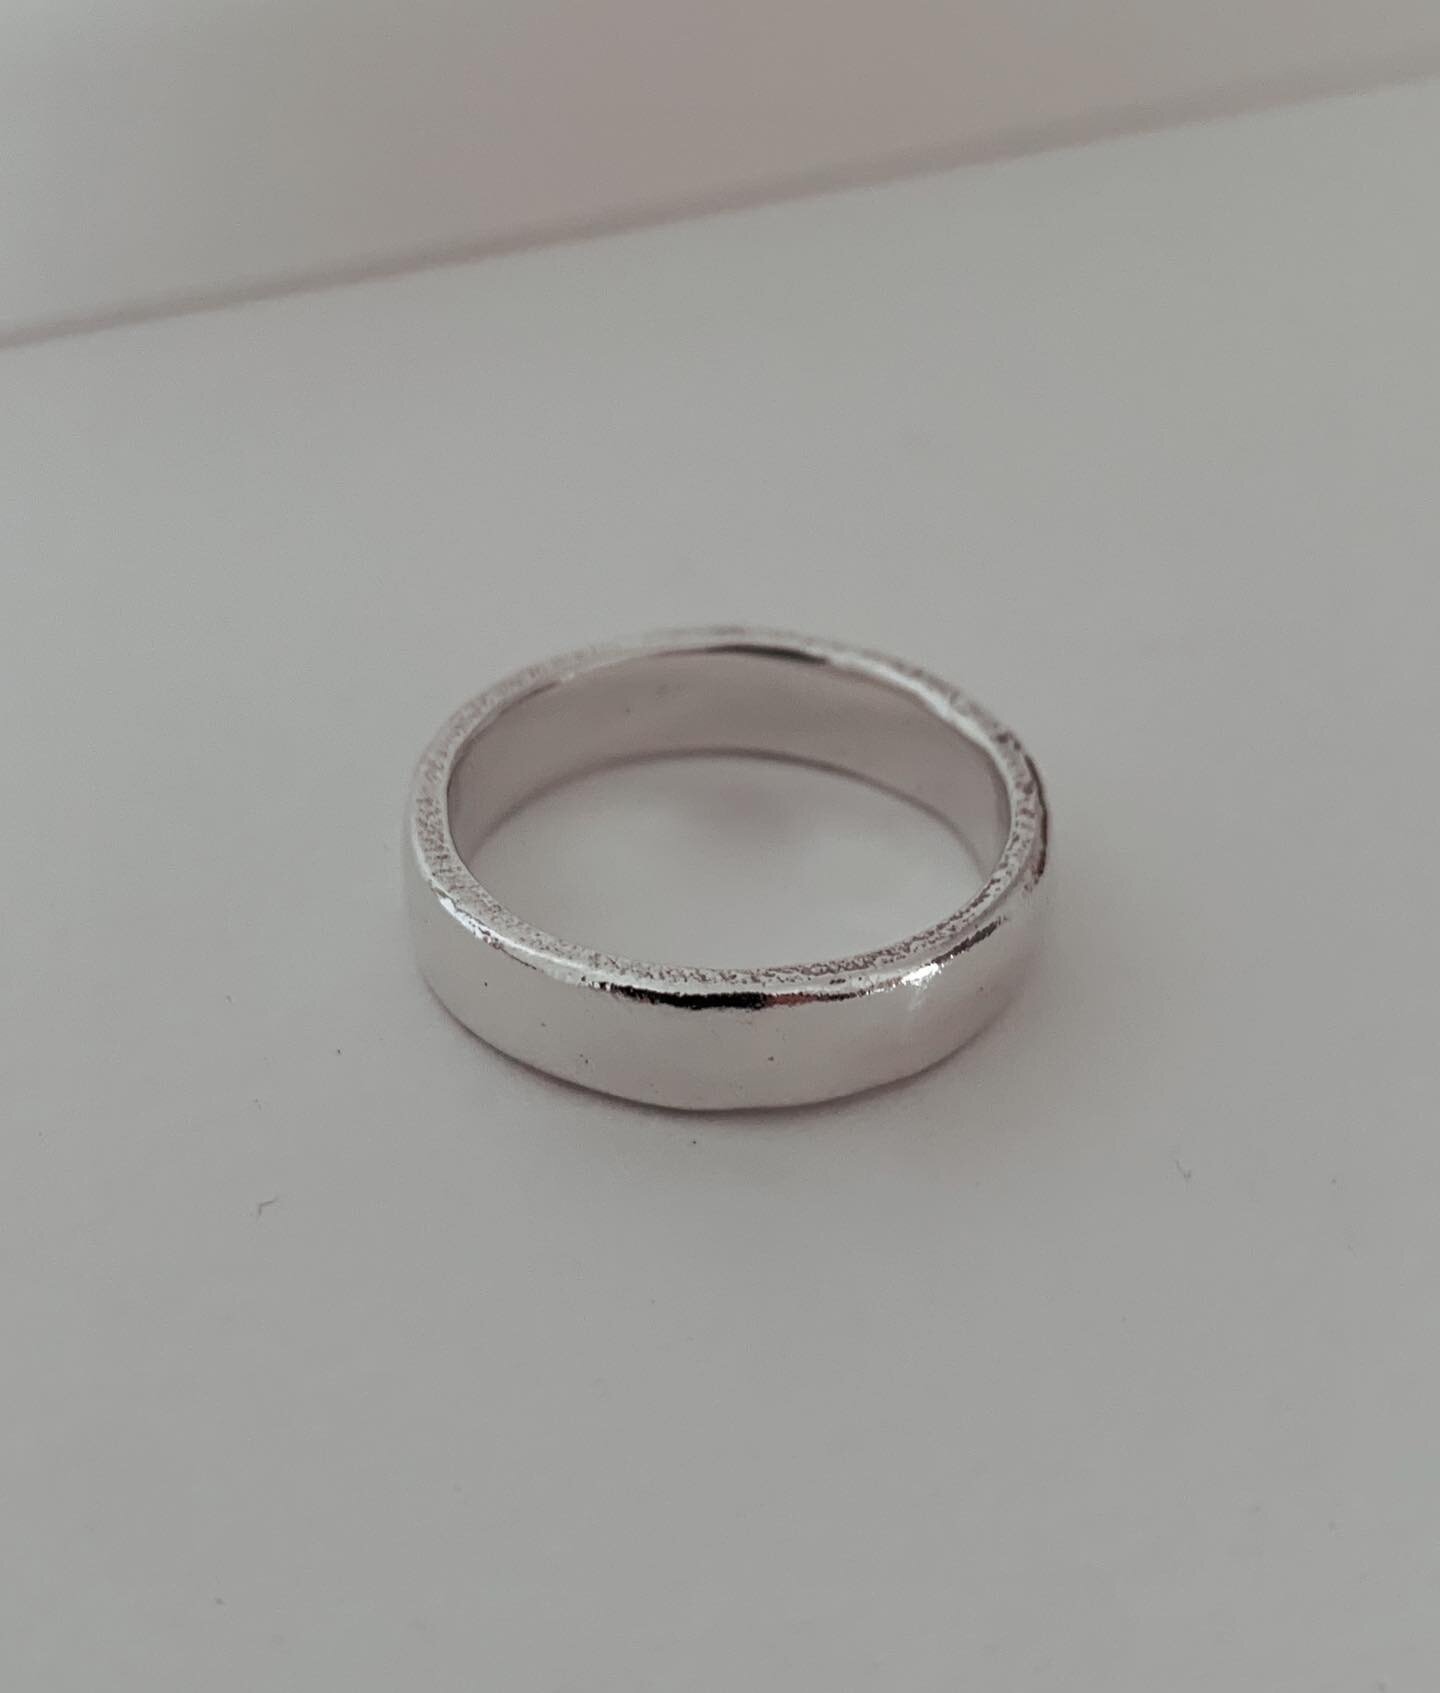 C O M M I S S I O N ◻️ I&rsquo;ve been quietly working away on my 2023 commissions. First of the year was this hand carved  and sand cast men&rsquo;s wedding ring in sterling silver. Smooth finish on the band with detailing on the top and bottom